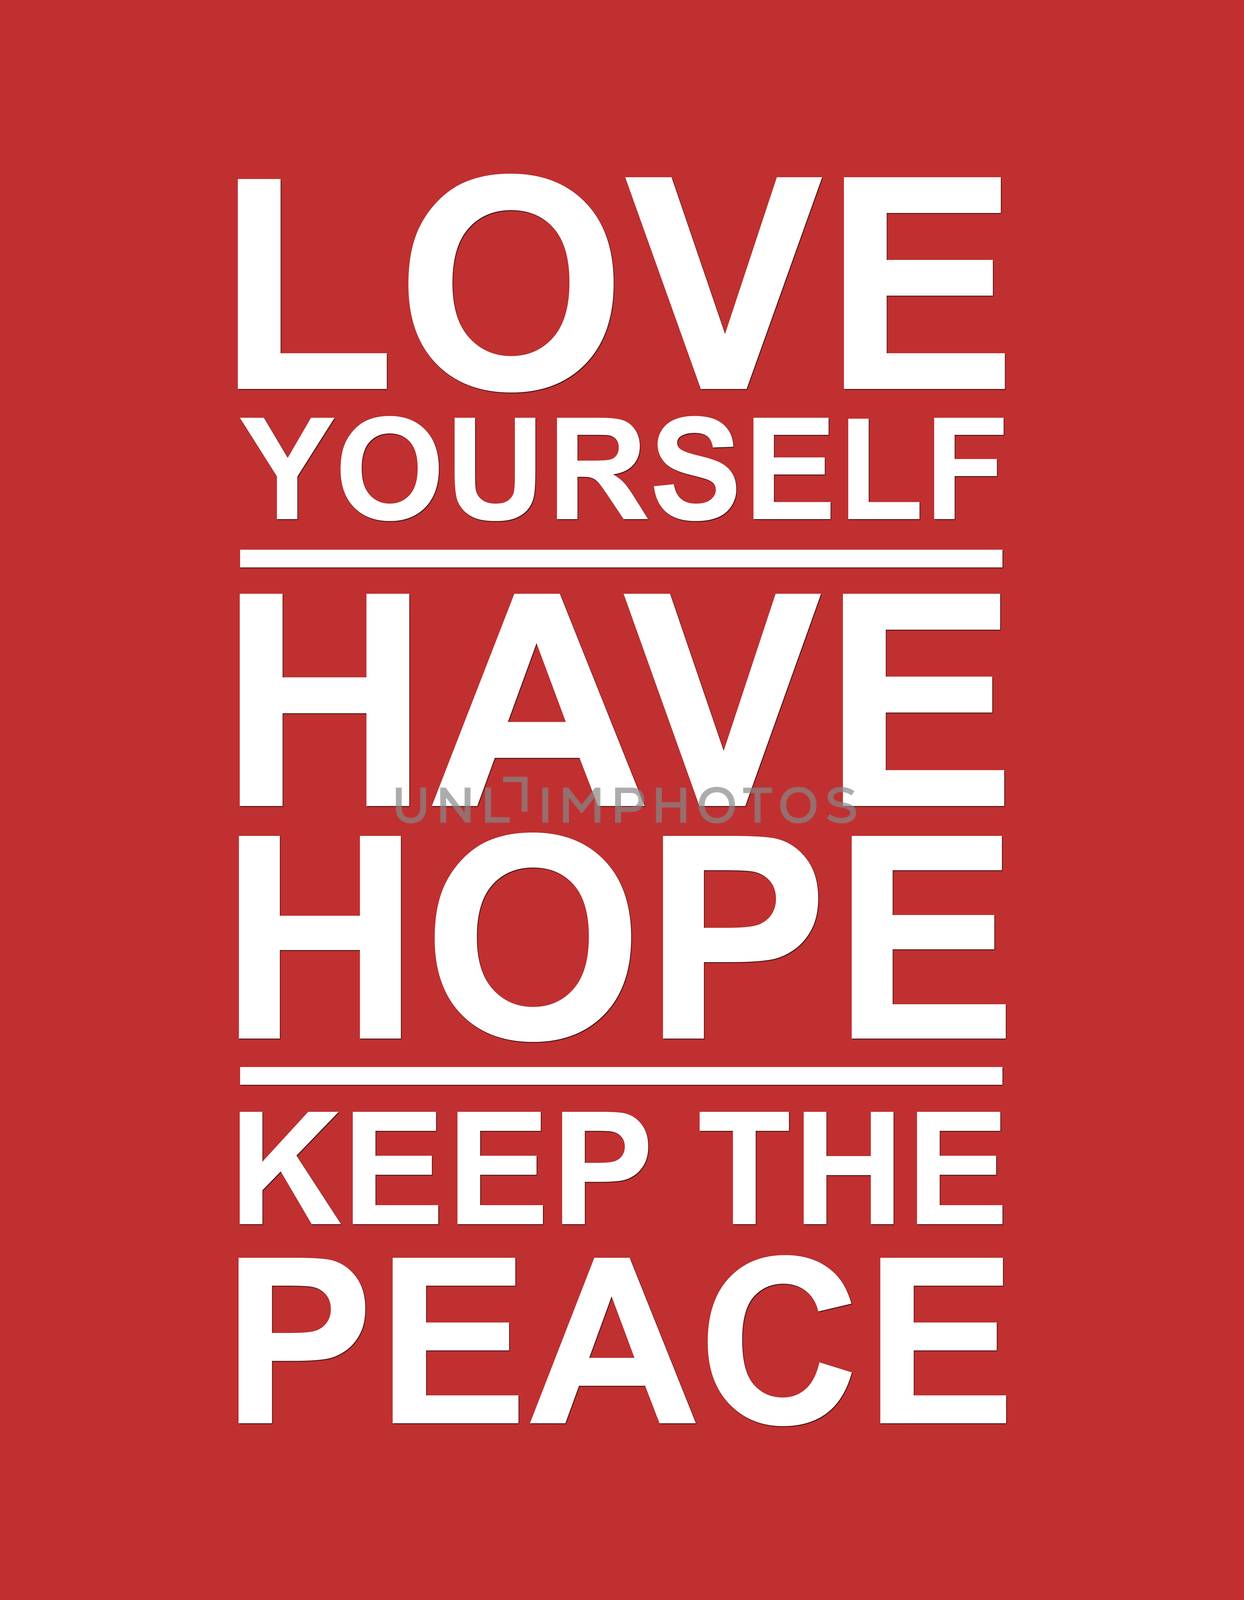 Inspirational text saying "Love yourself, have hope and keep the peace"